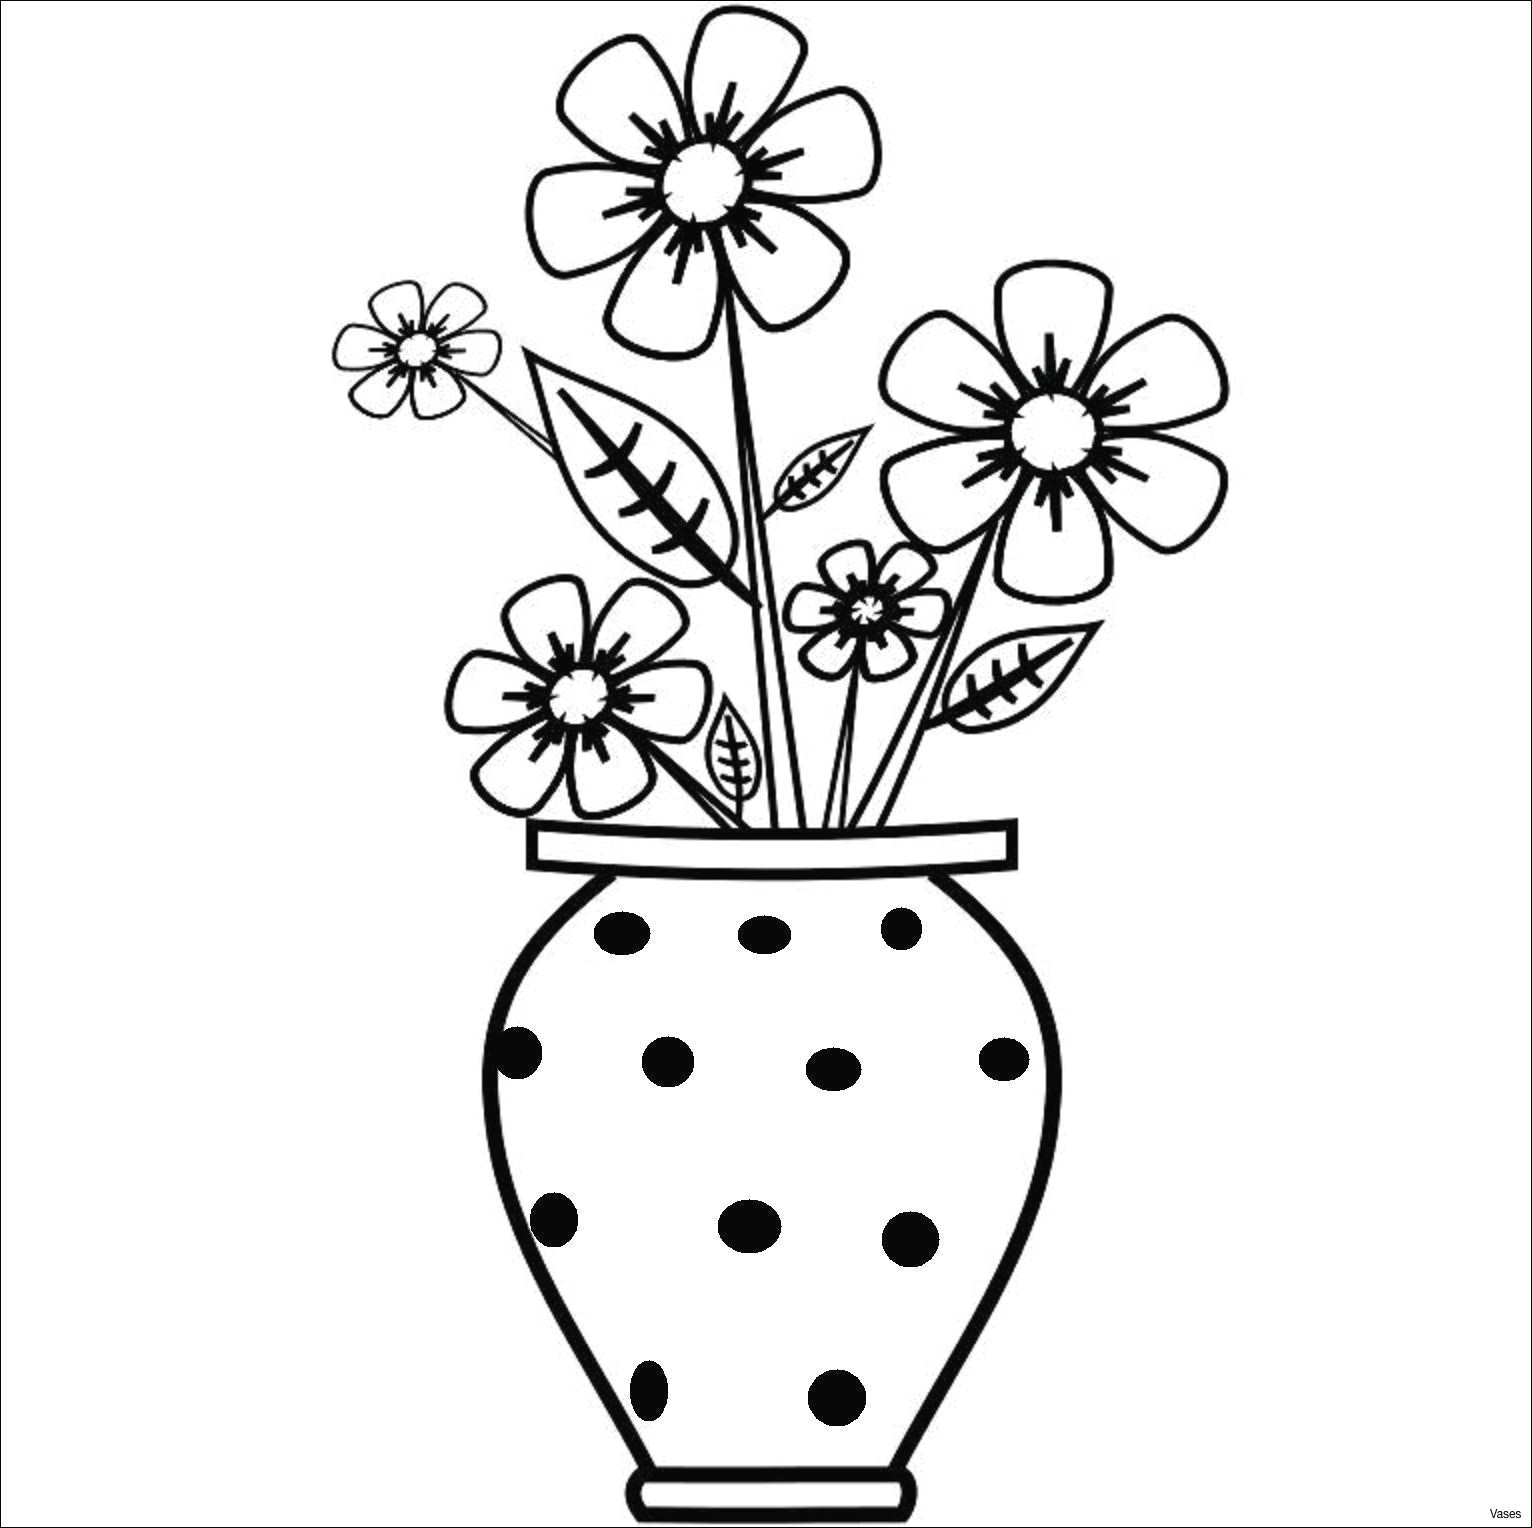 Drawings Of Roses Clipart Roses Clipart Black and White Charte Graphique org